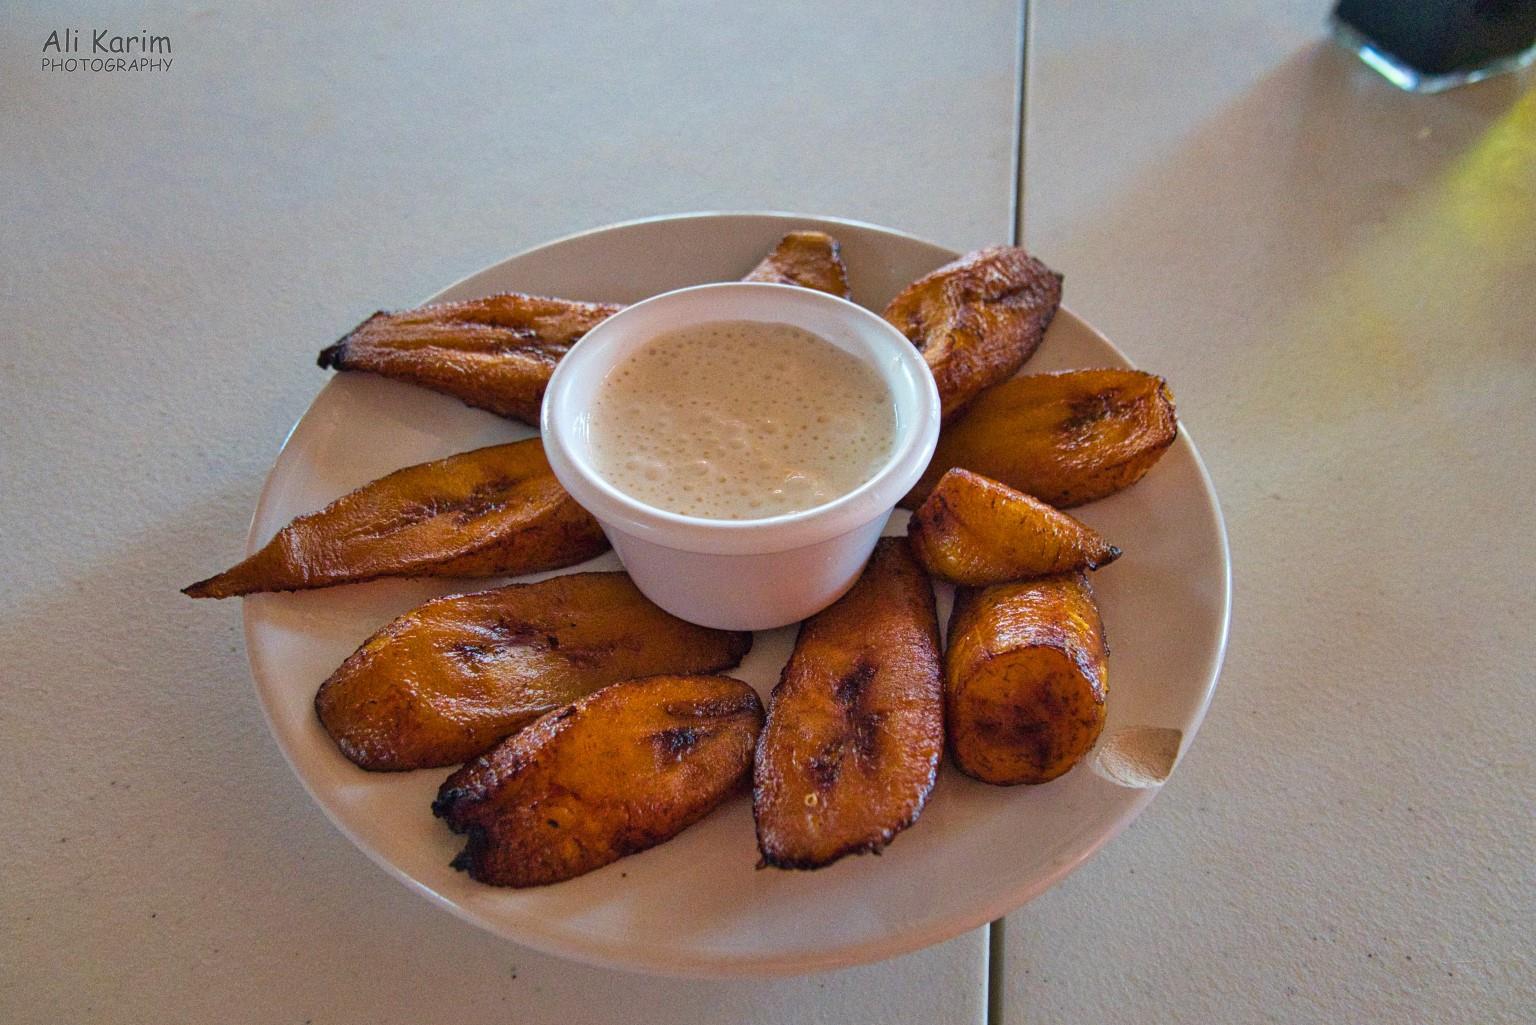 Bacalar & Mahahual, Mexico, Jan 2020, And fried sweet plantain for desert